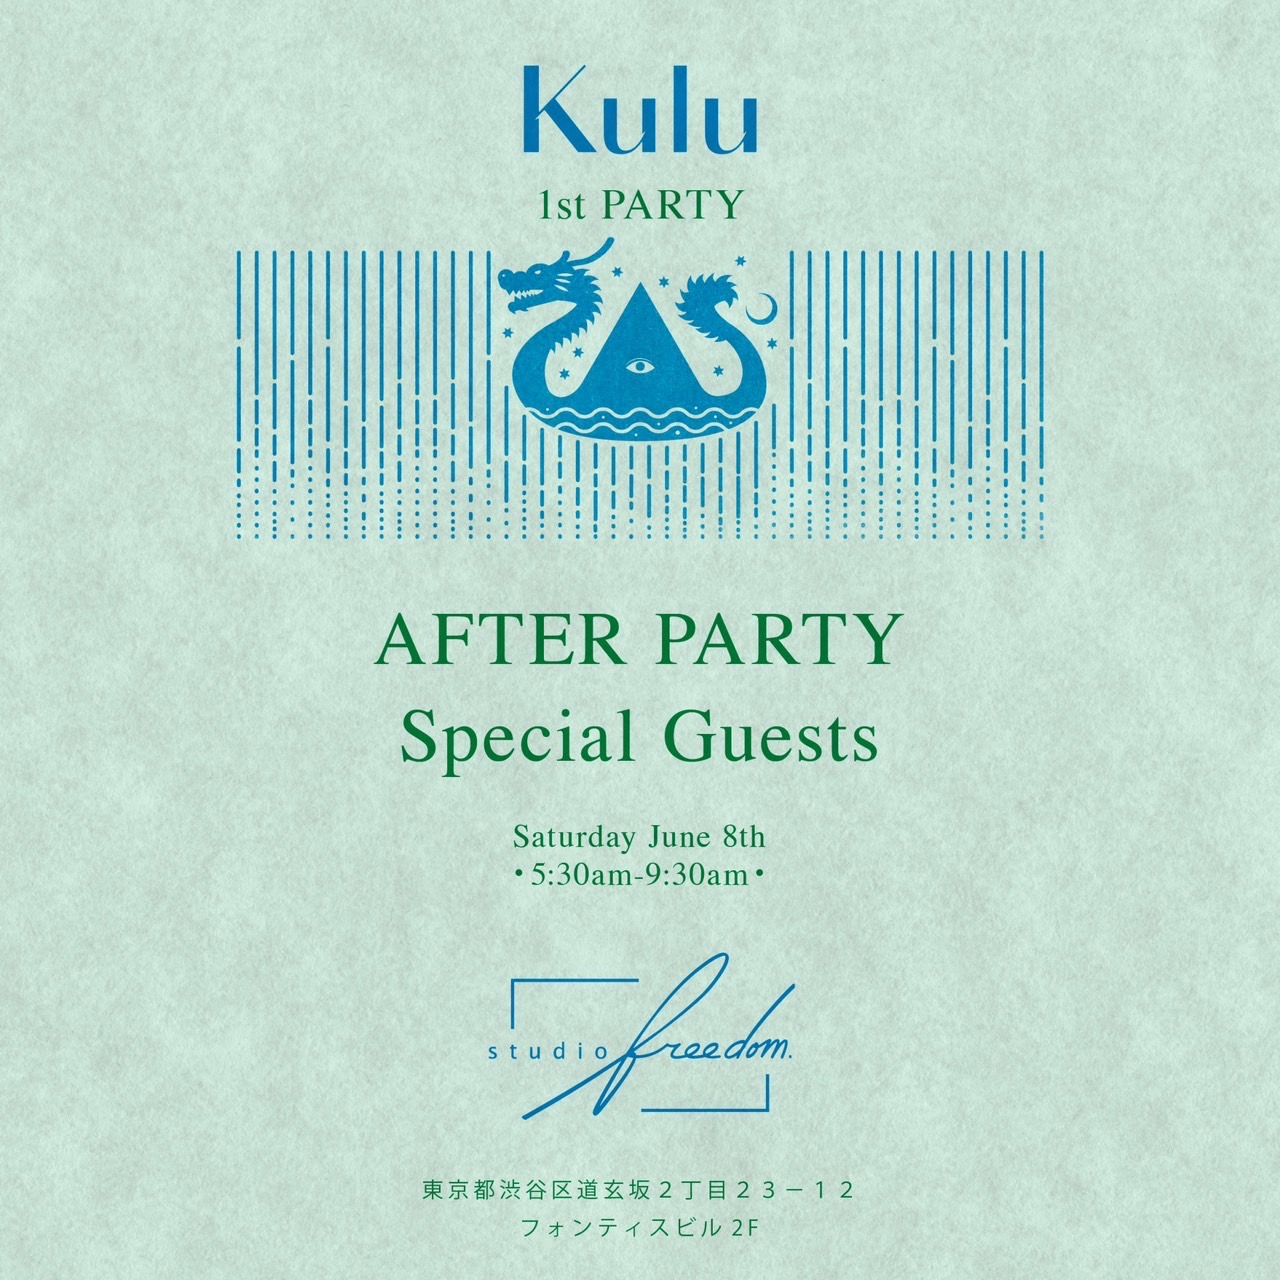 Kulu official after party